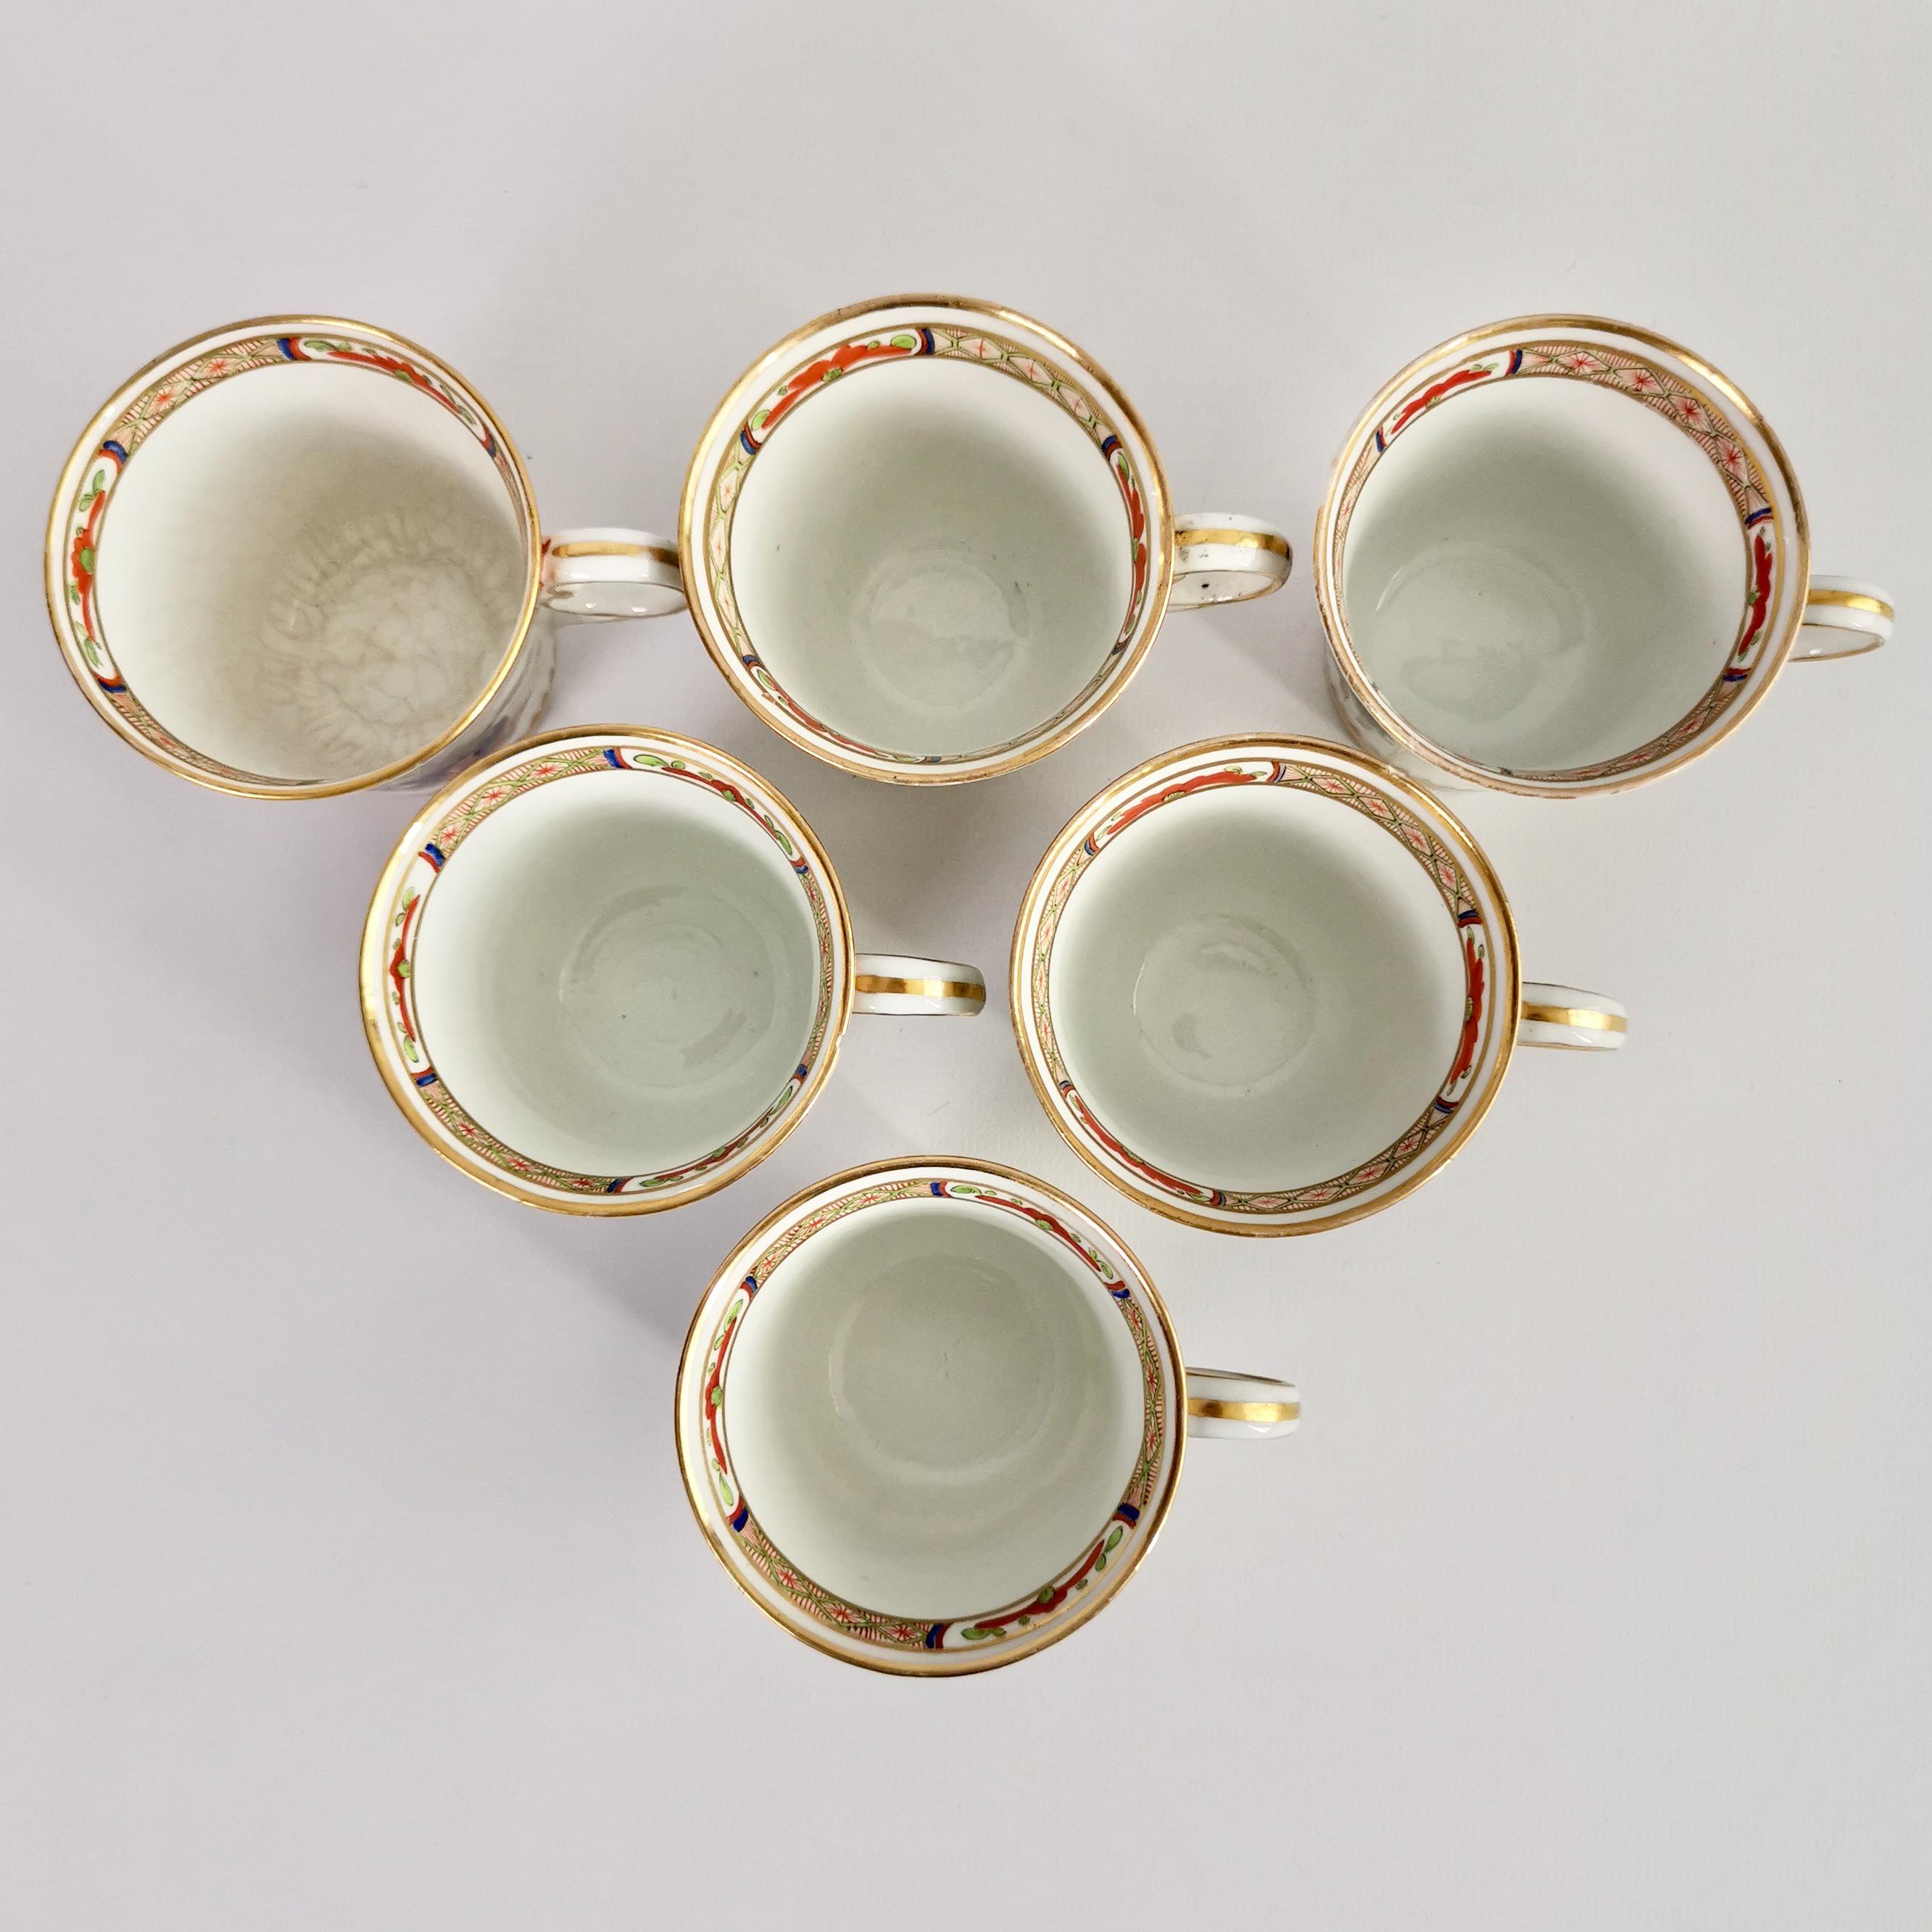 Set of 6 Chamberlain's Worcester Porcelain Coffee Cups, Dragons, circa 1810 5